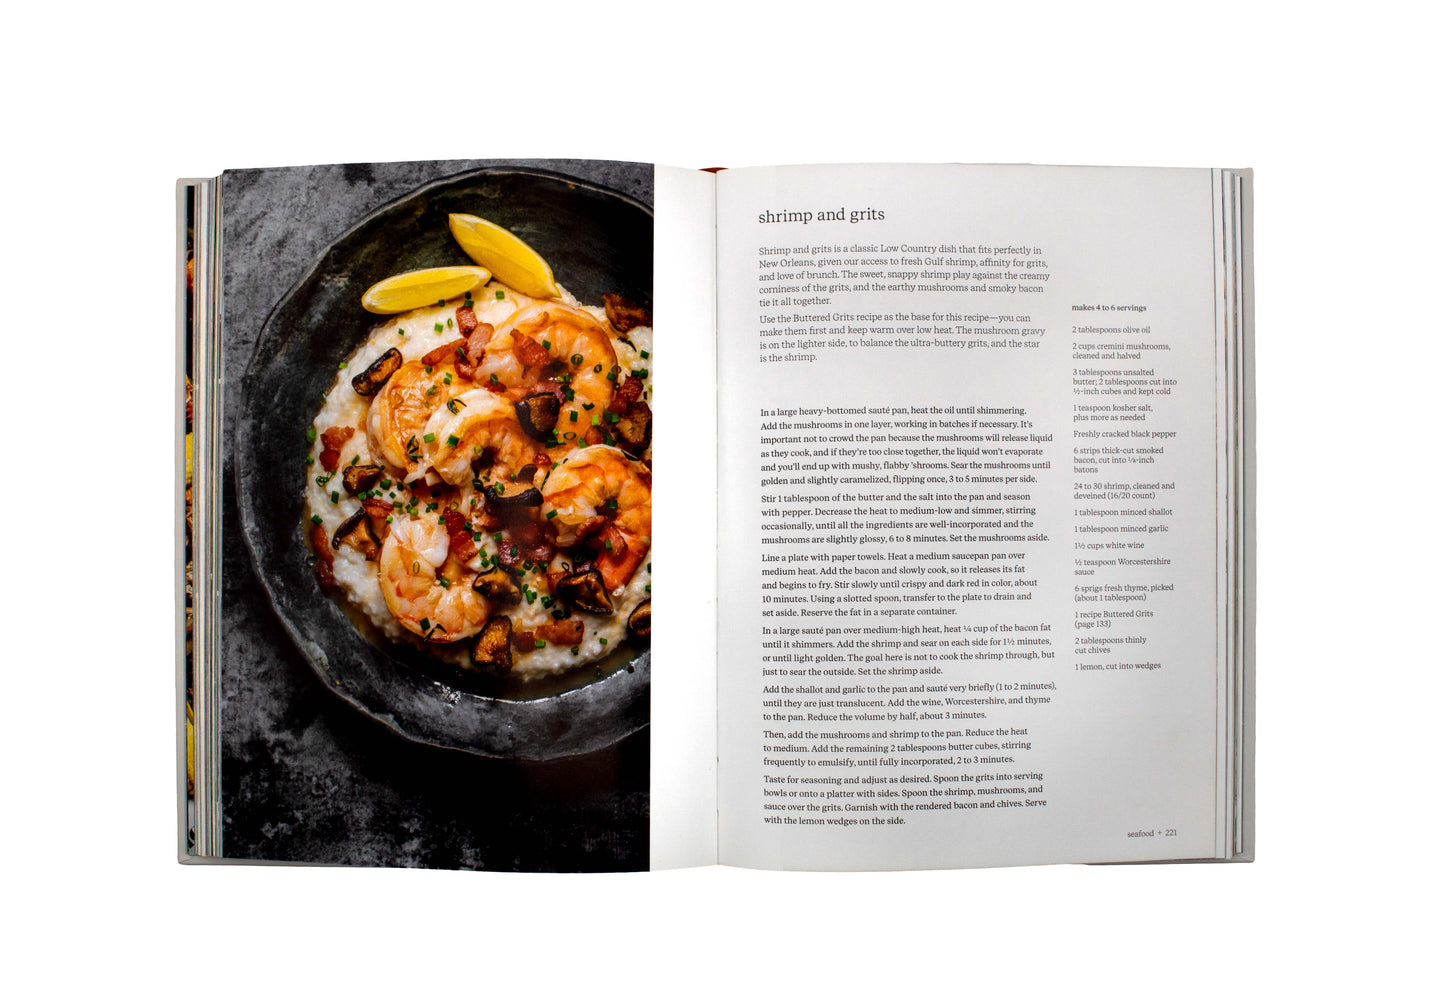 The New Orleans Kitchen: Classic Recipes and Modern Techniques for an Unrivaled Cuisine